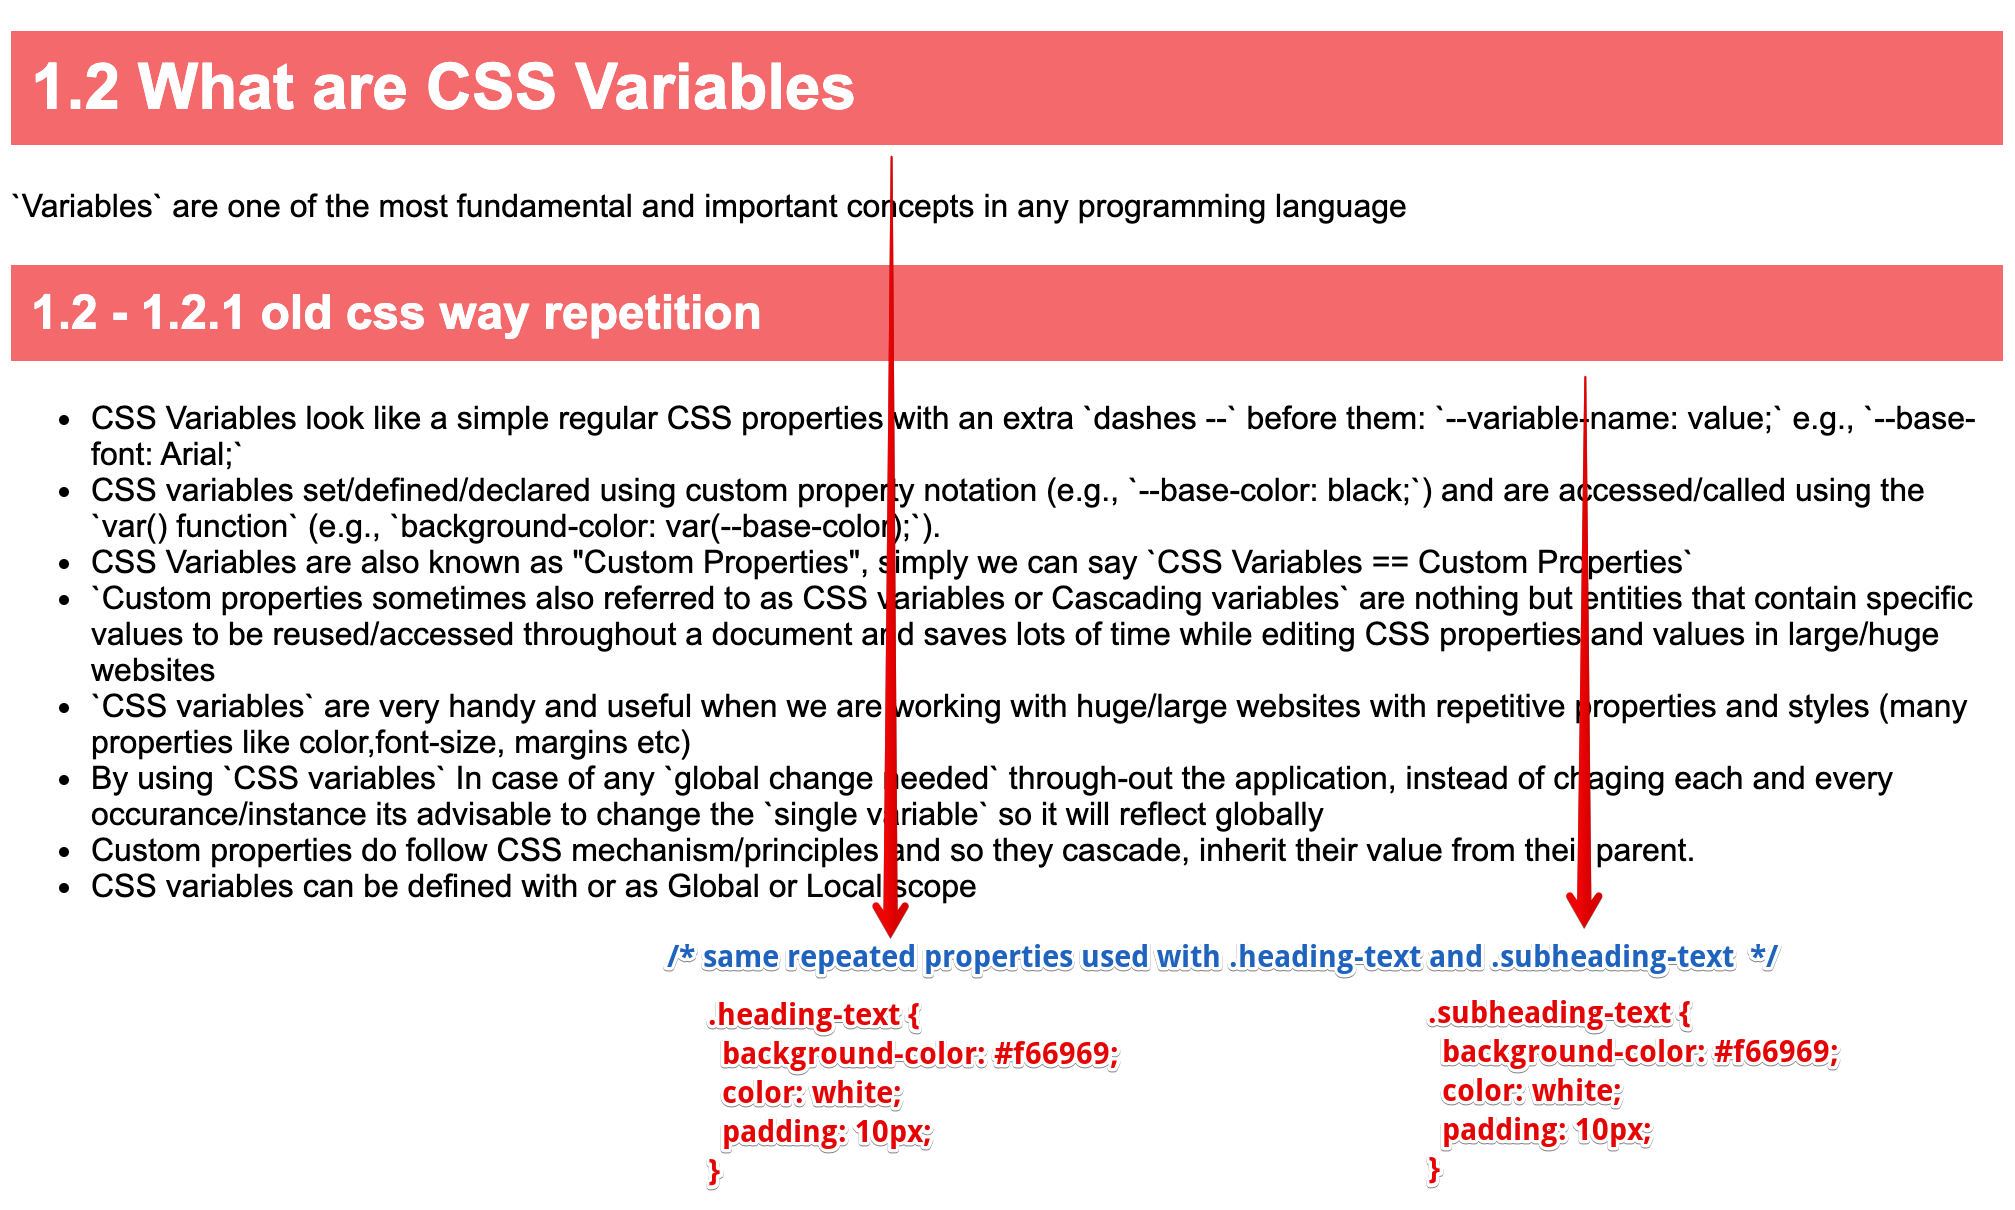 The old CSS way of repeating value